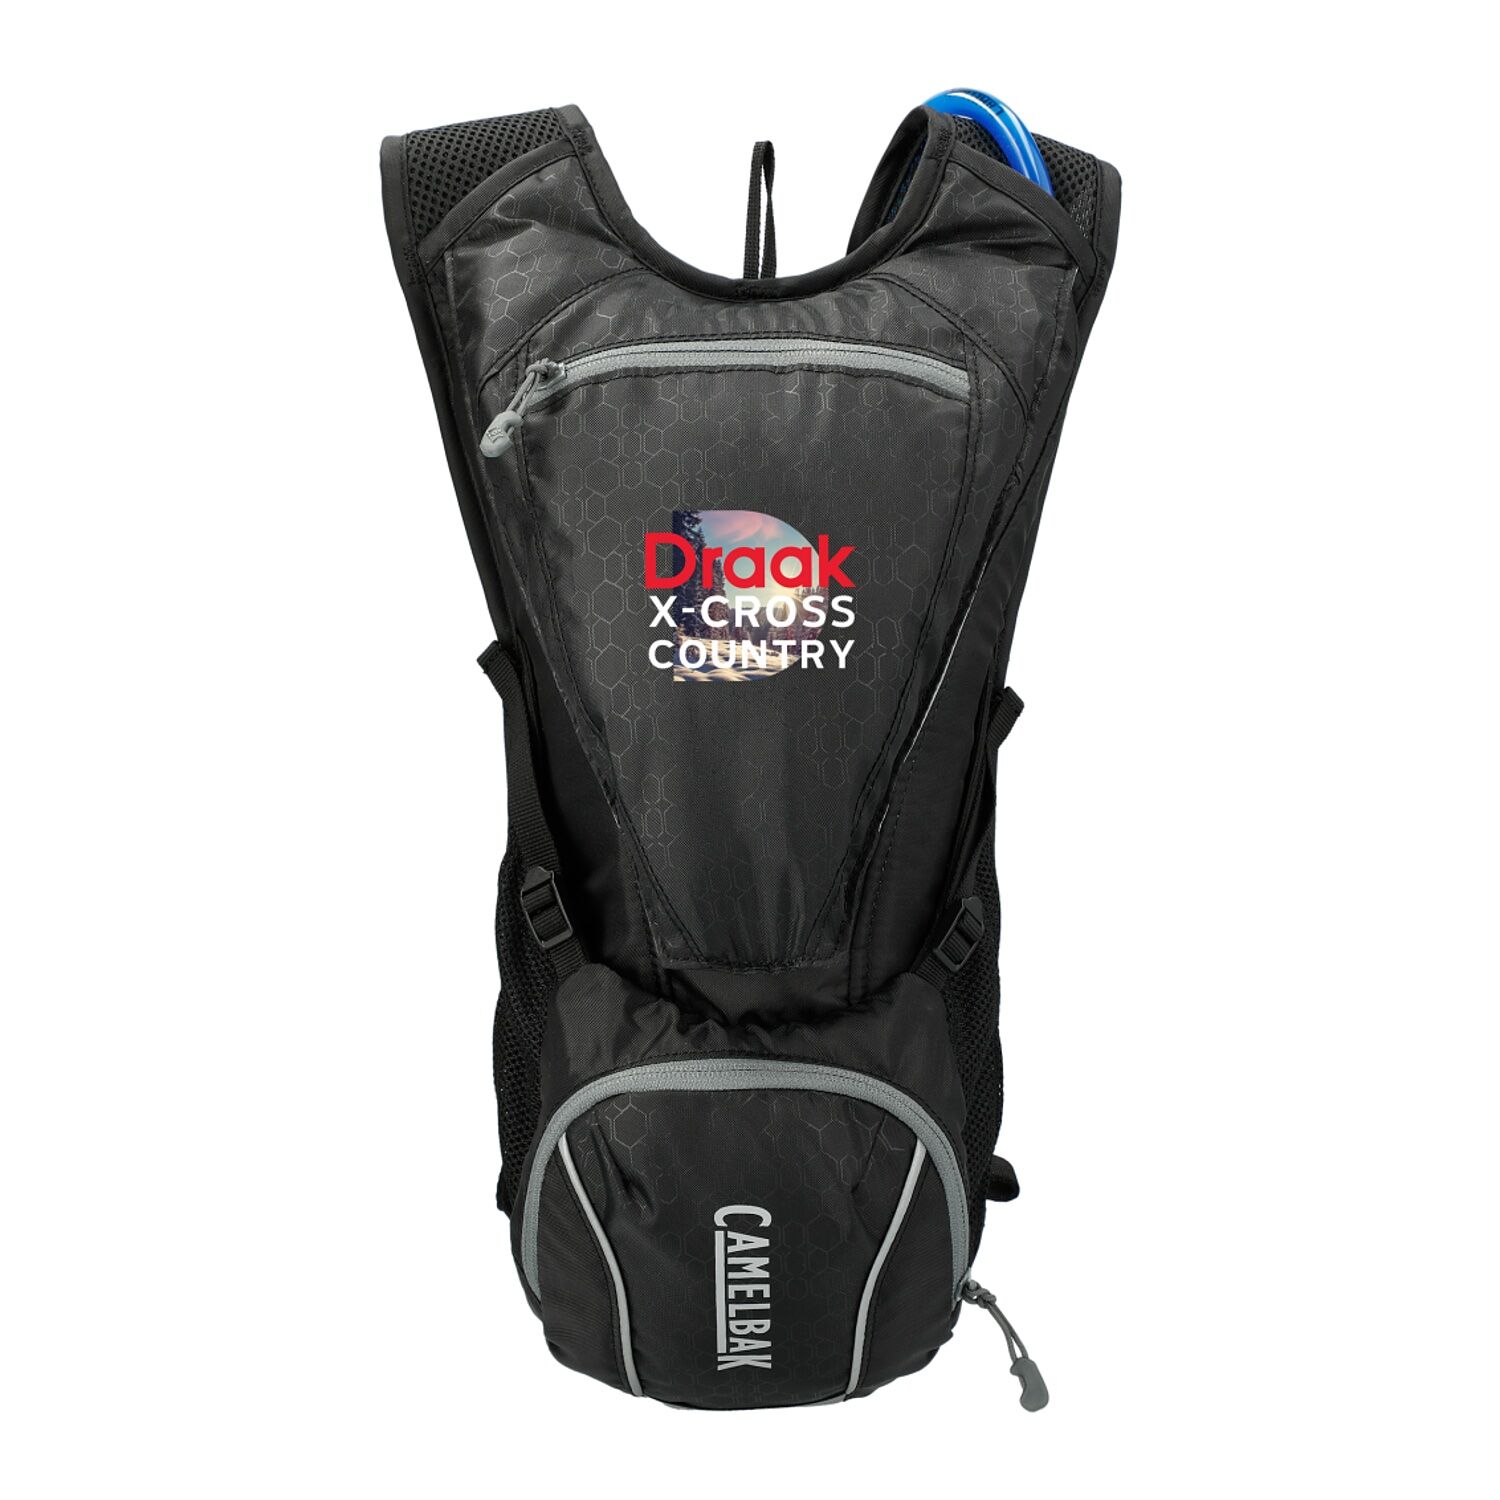 Branded Camelbak Eco-Rogue Hydration Pack Graphite/Black